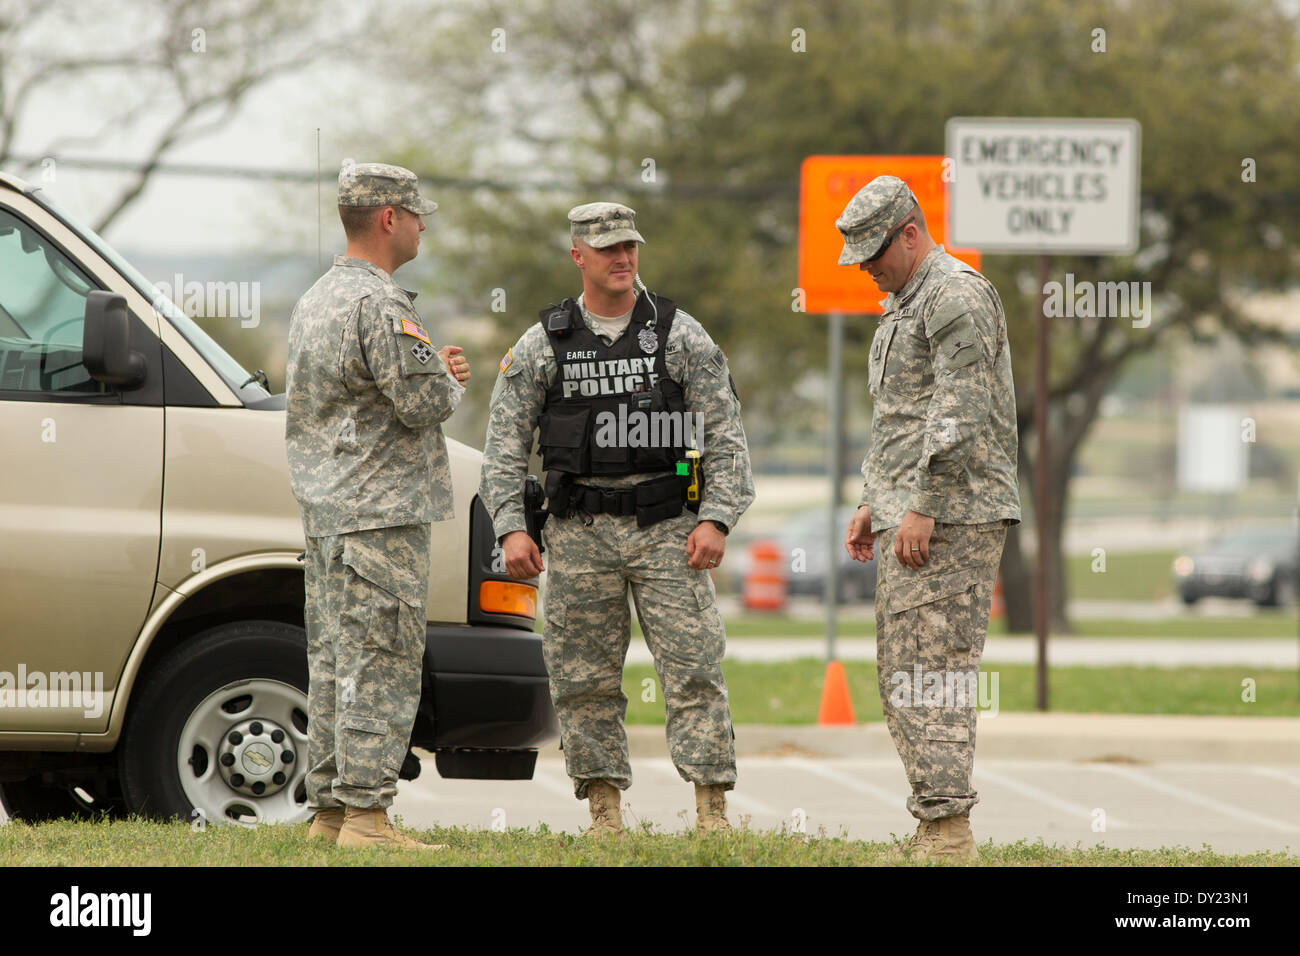 Military police in camouflage uniforms on duty near the main gate of Fort  Hood Army Post in Killeen, Texas Stock Photo - Alamy